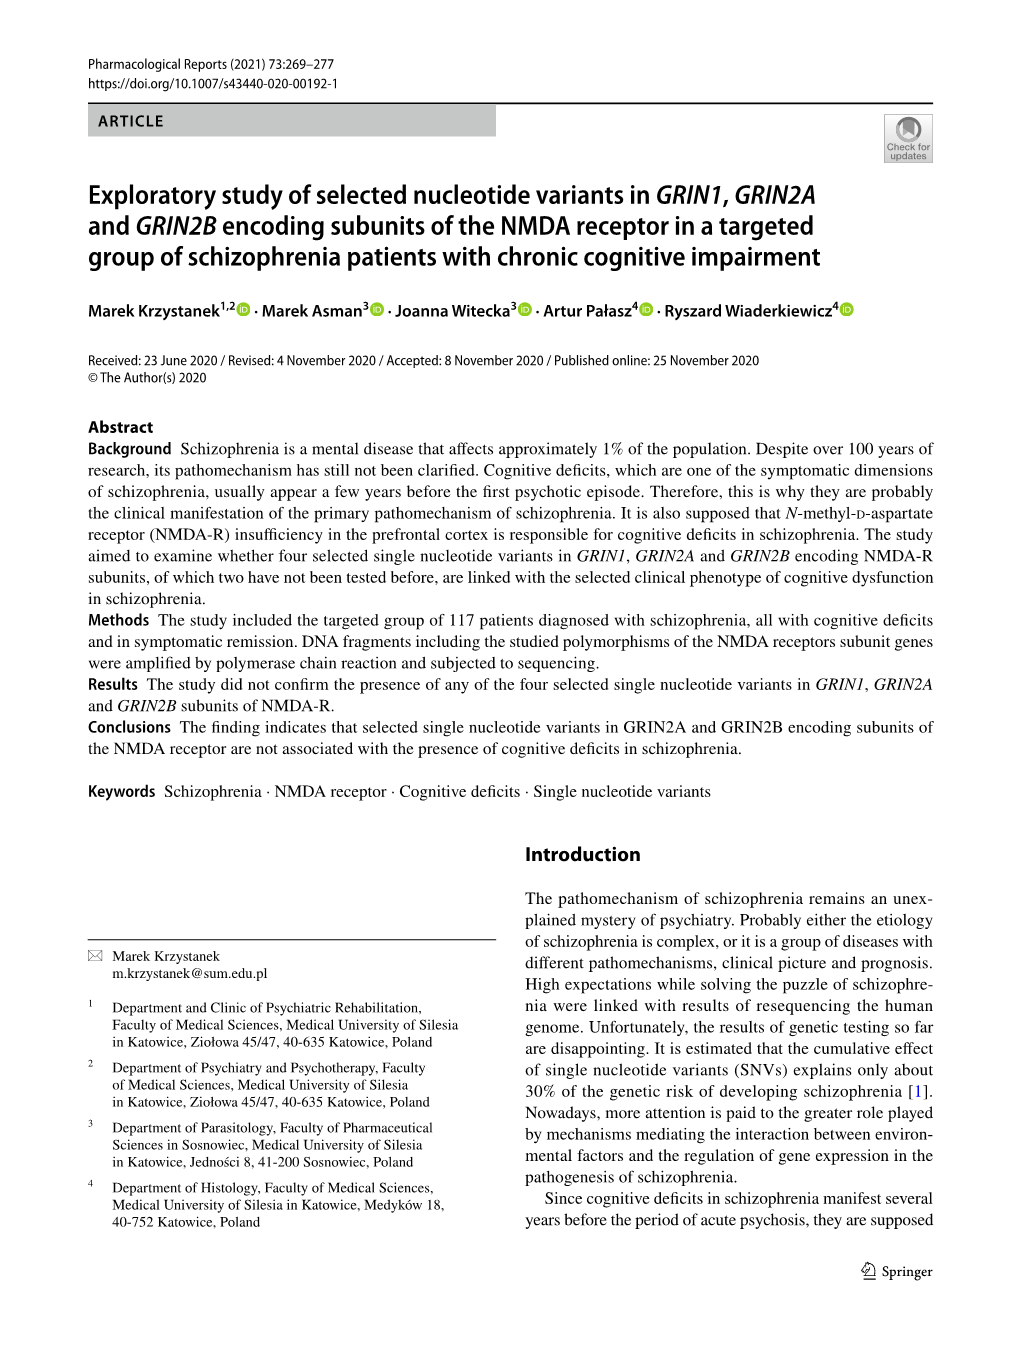 Exploratory Study of Selected Nucleotide Variants in GRIN1